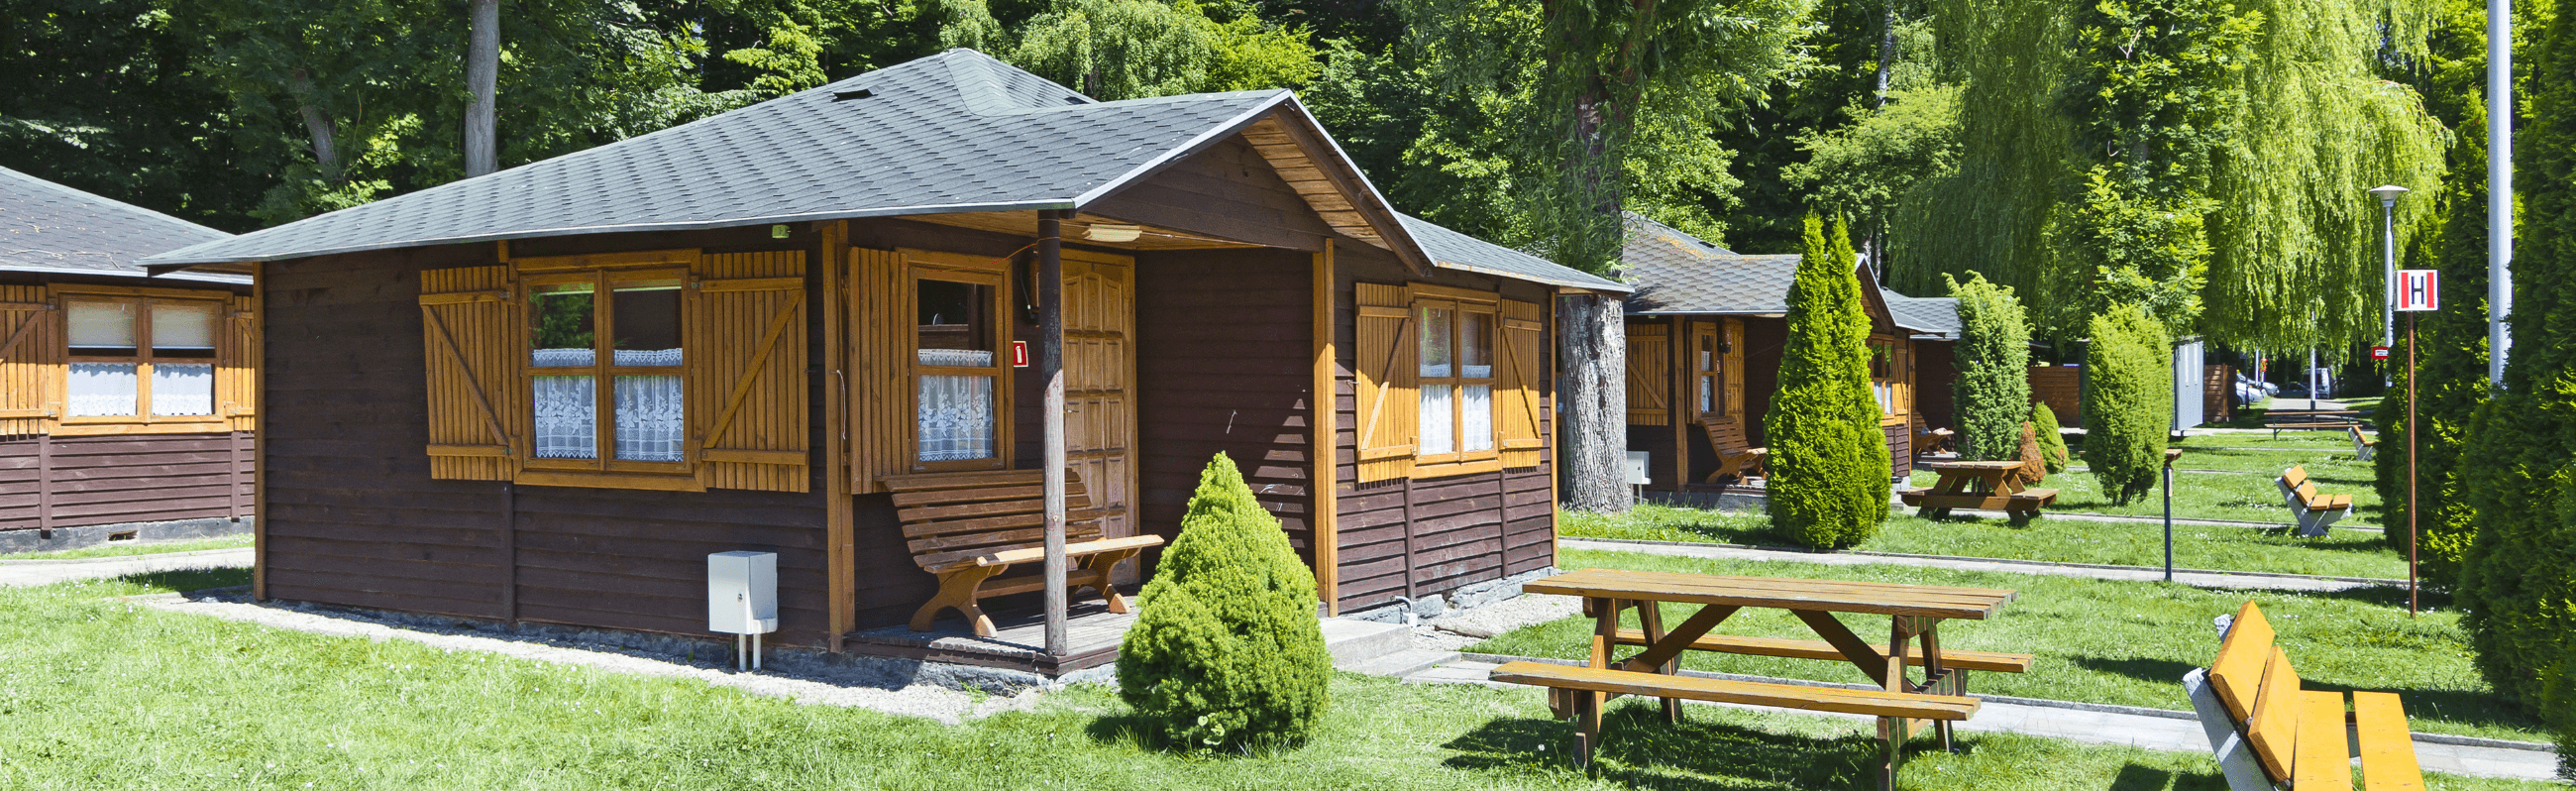 Photograph of a lodge exterior